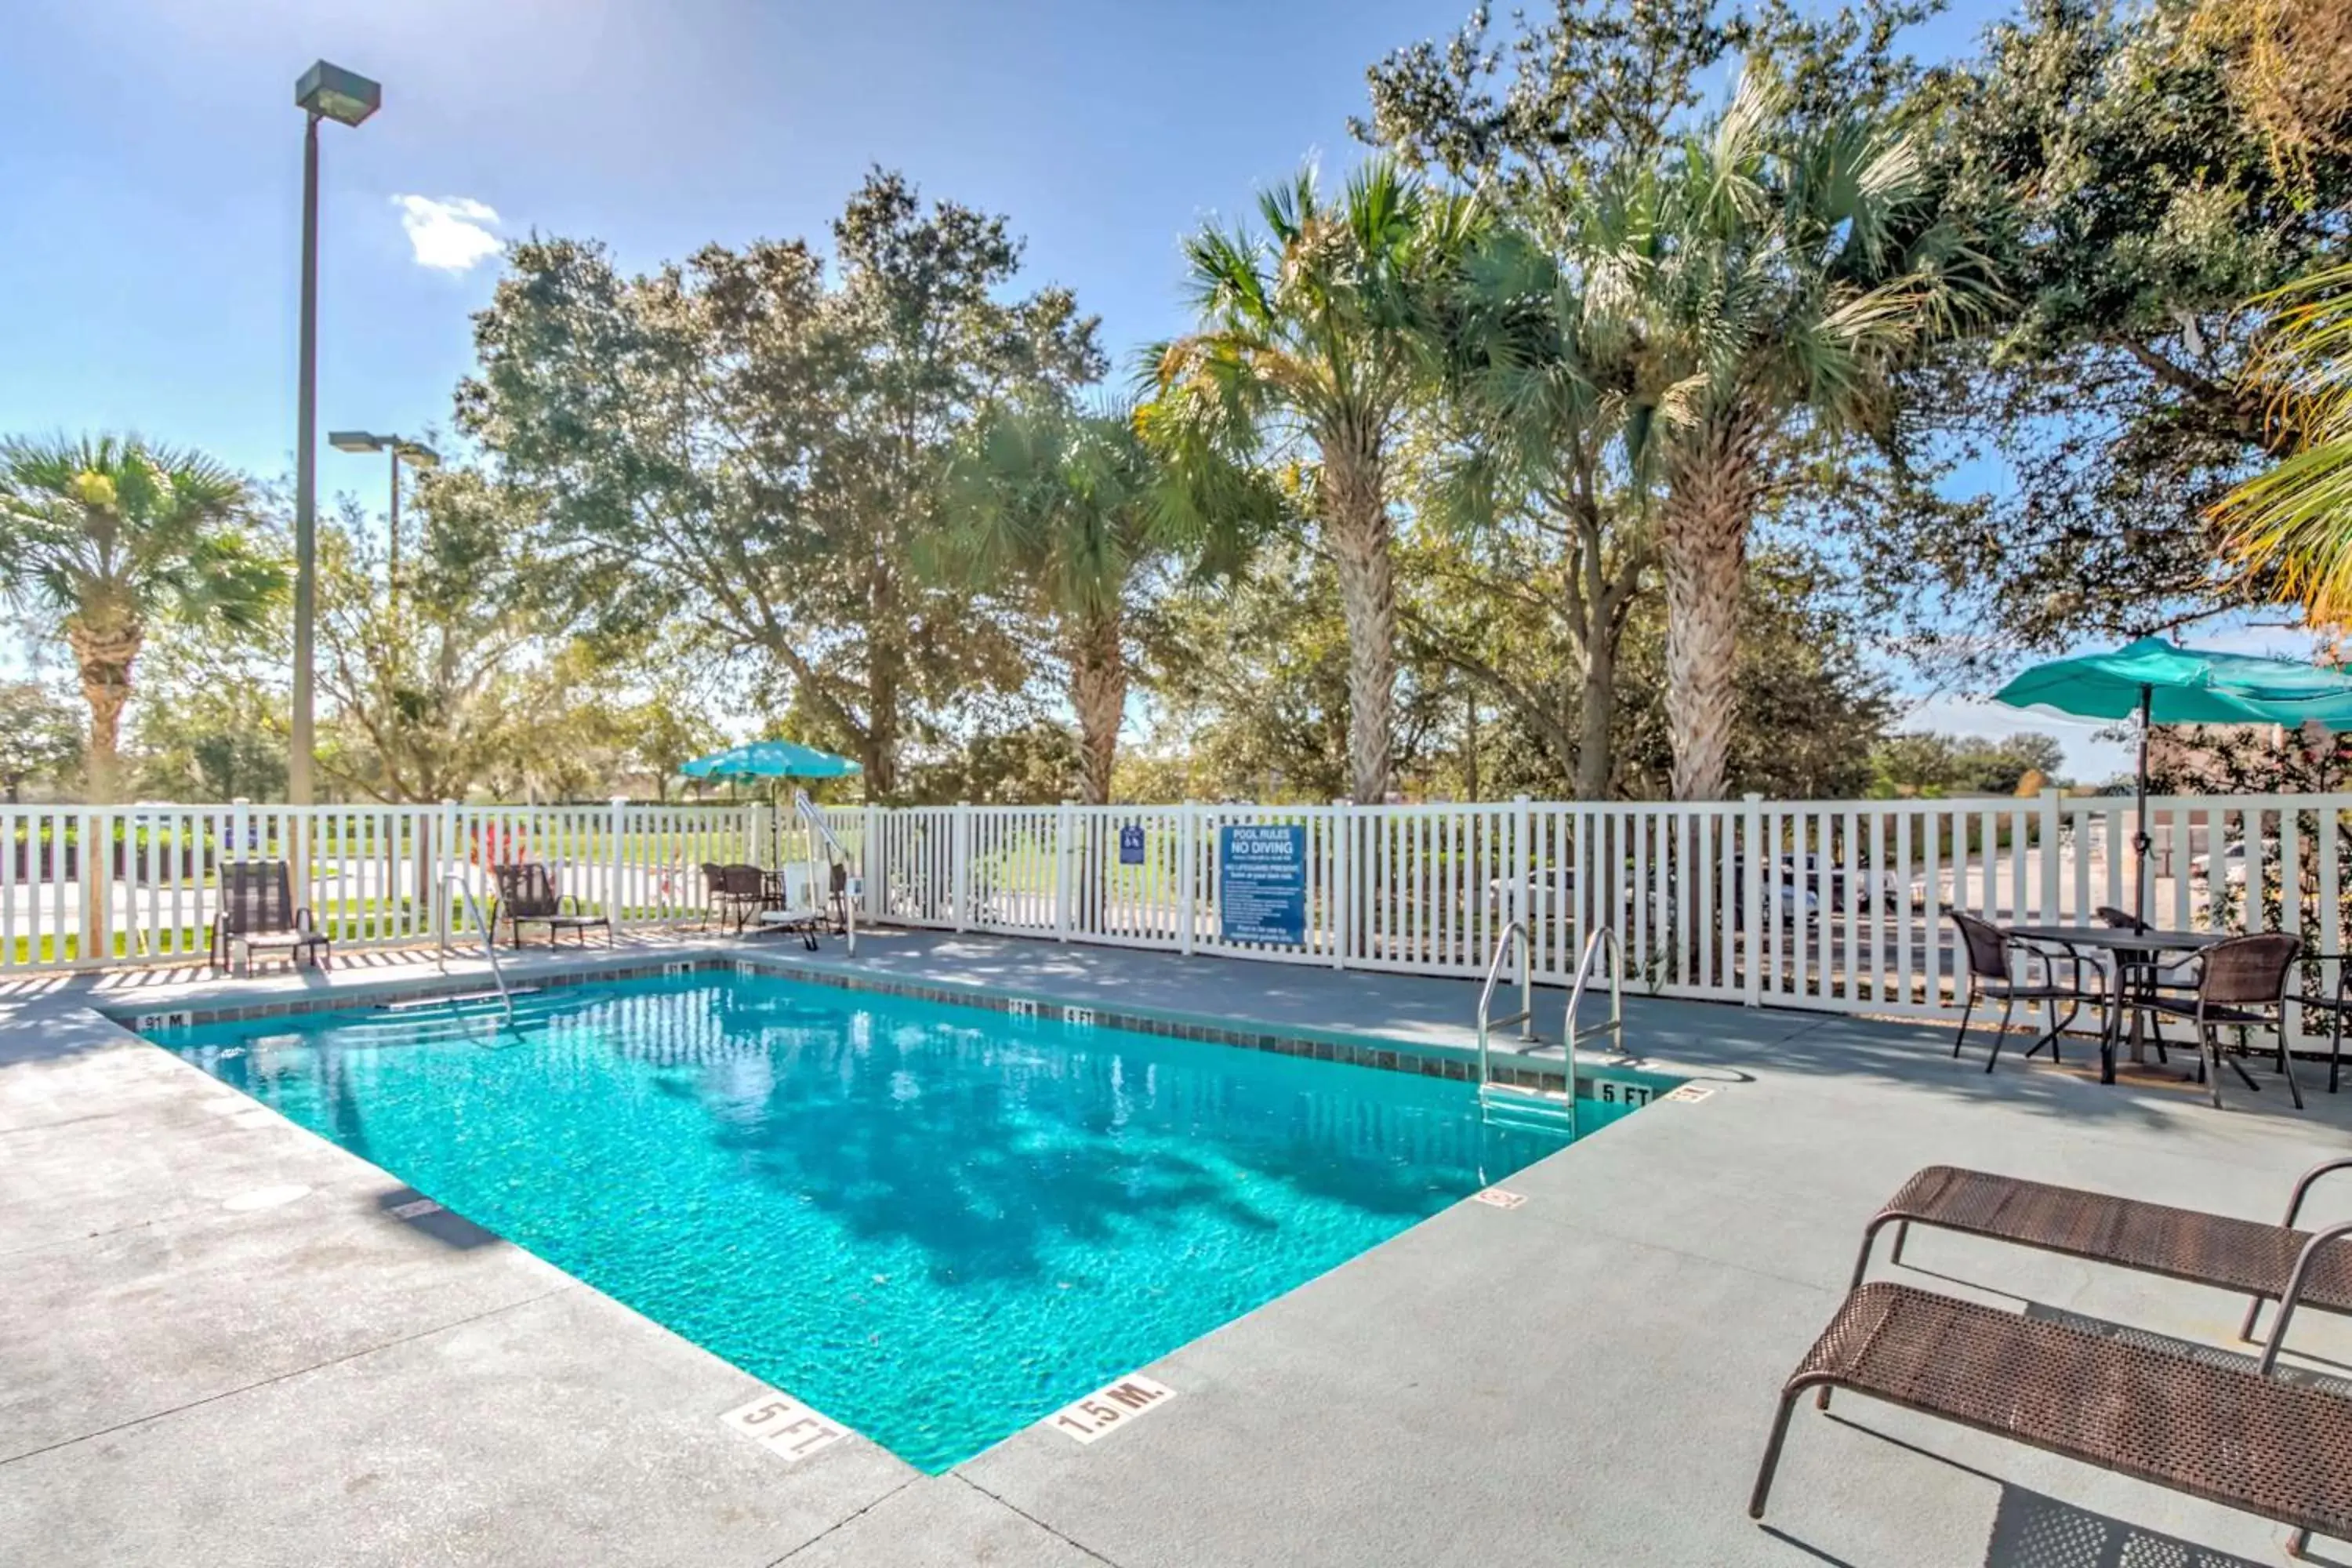 On site, Swimming Pool in Microtel Inn and Suites - Zephyrhills